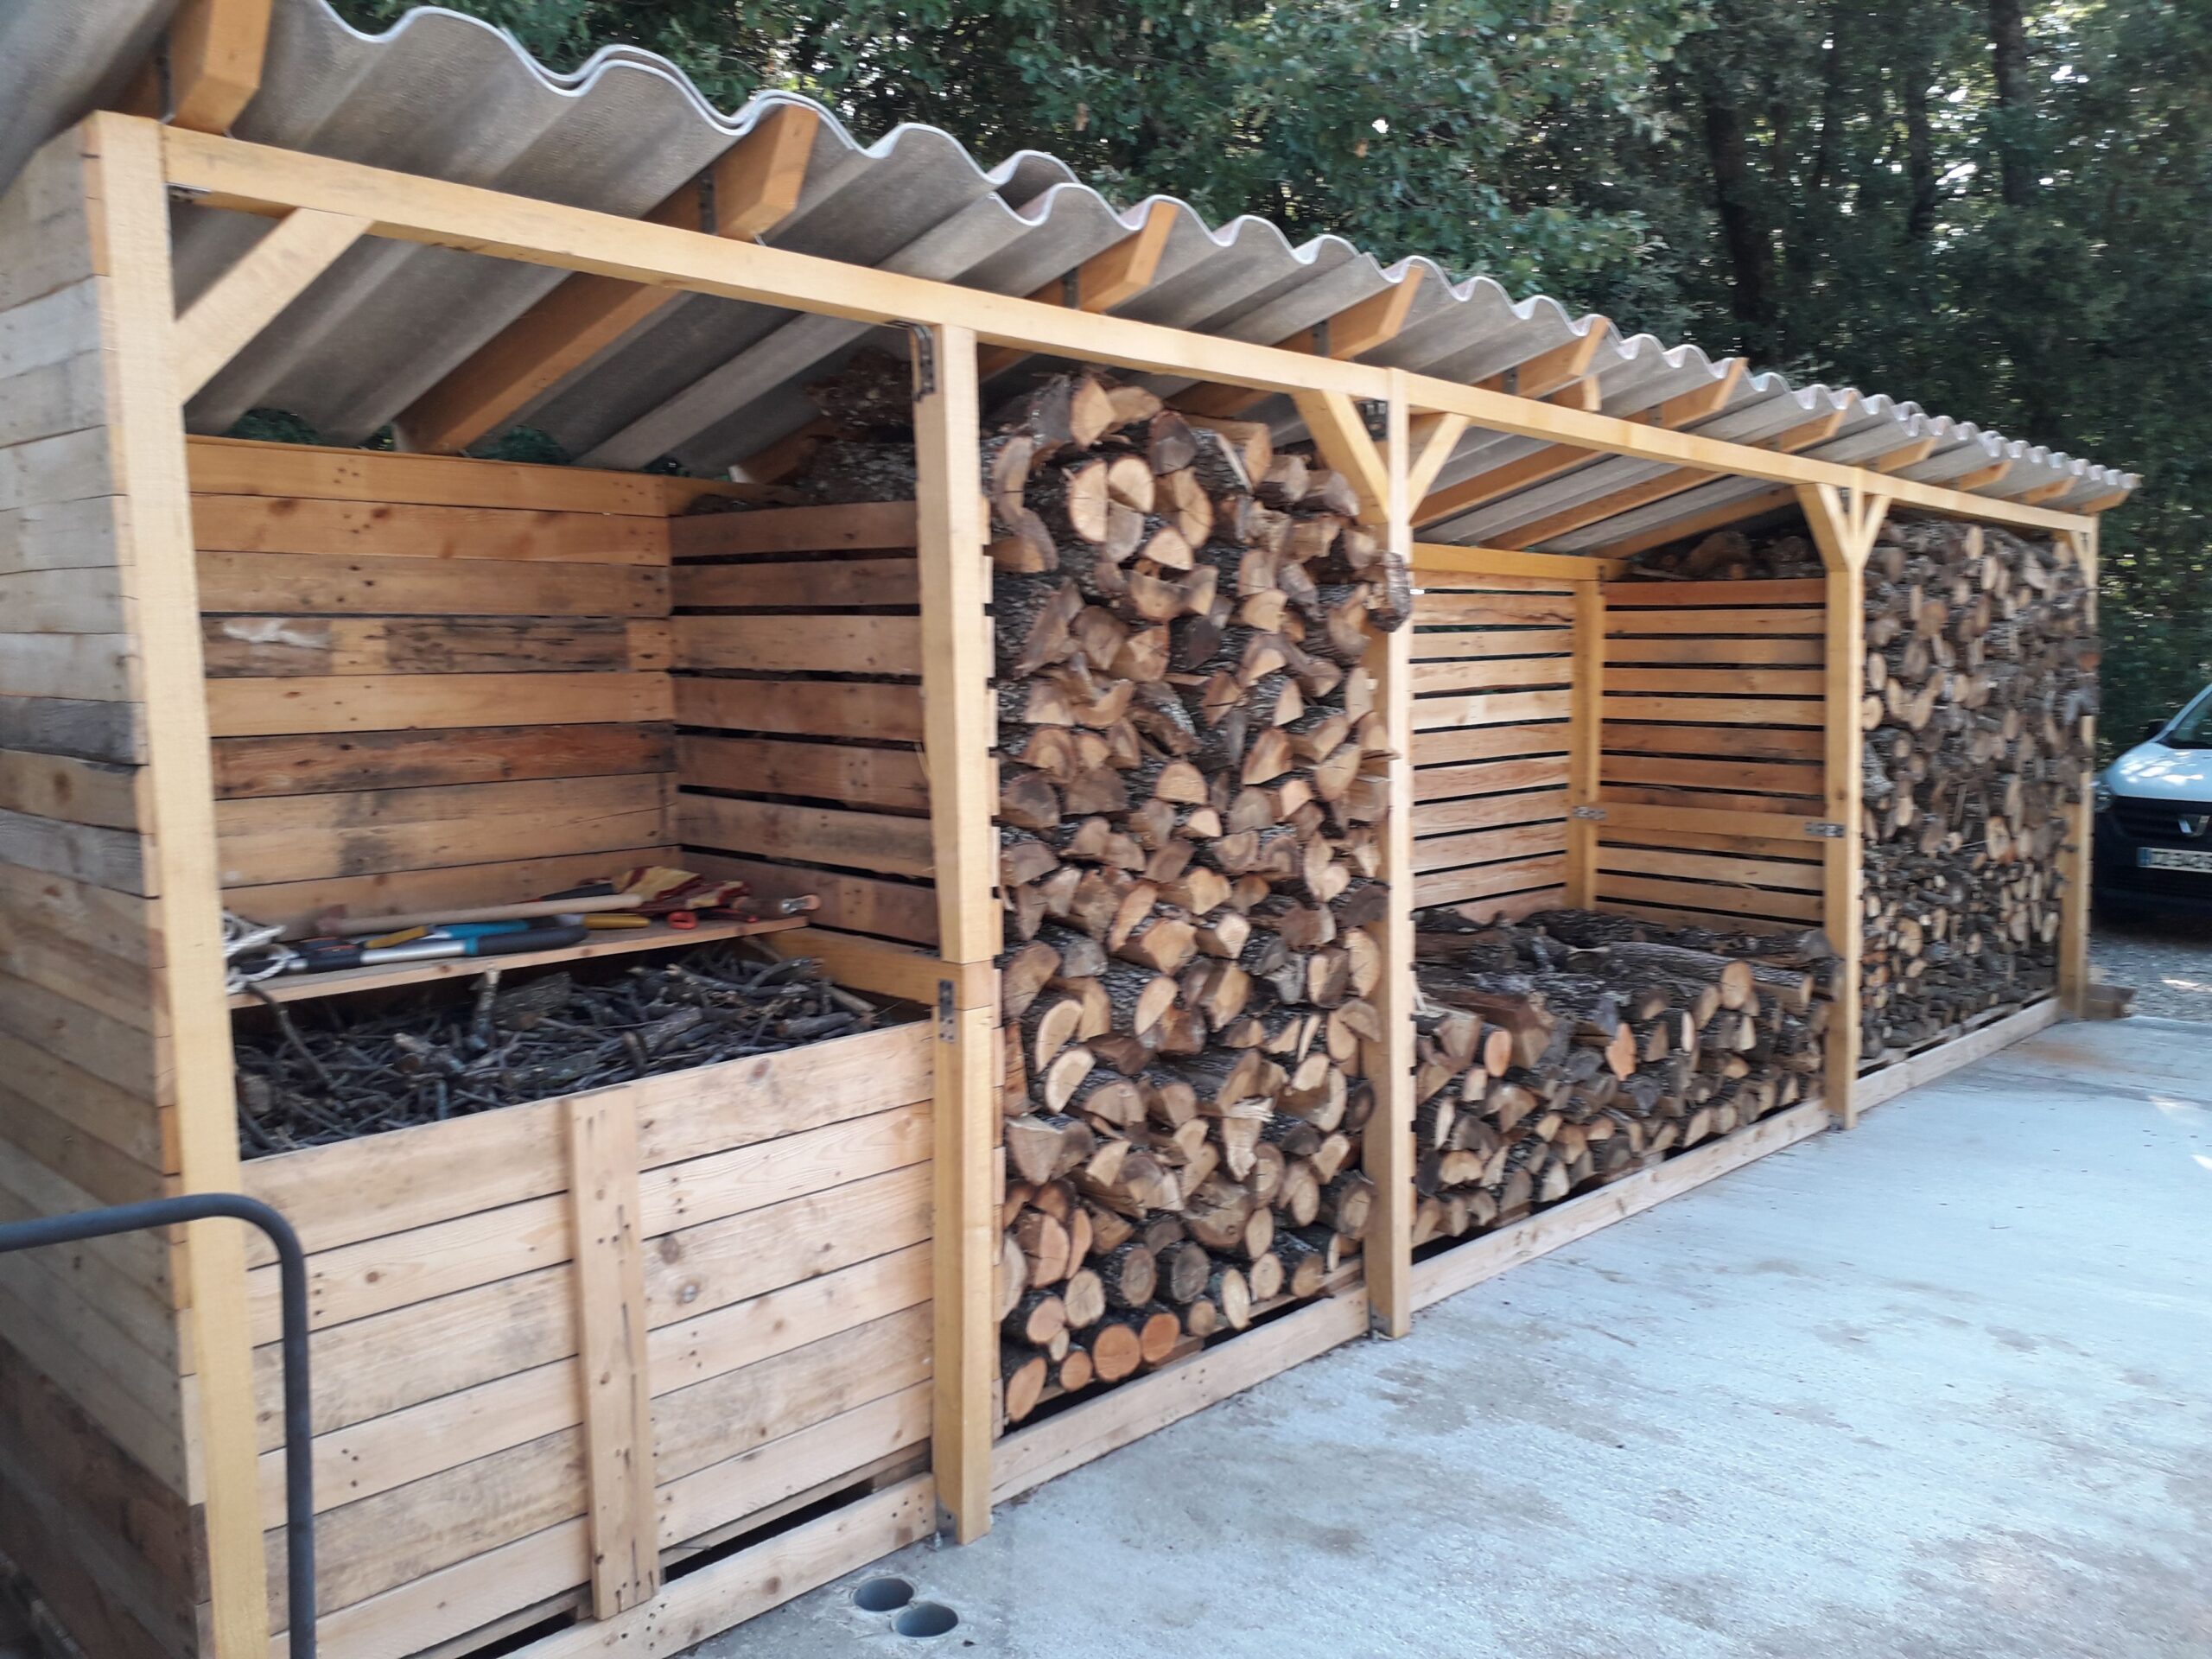 Find the Ultimate Wooden Shed for Your
Storage Needs